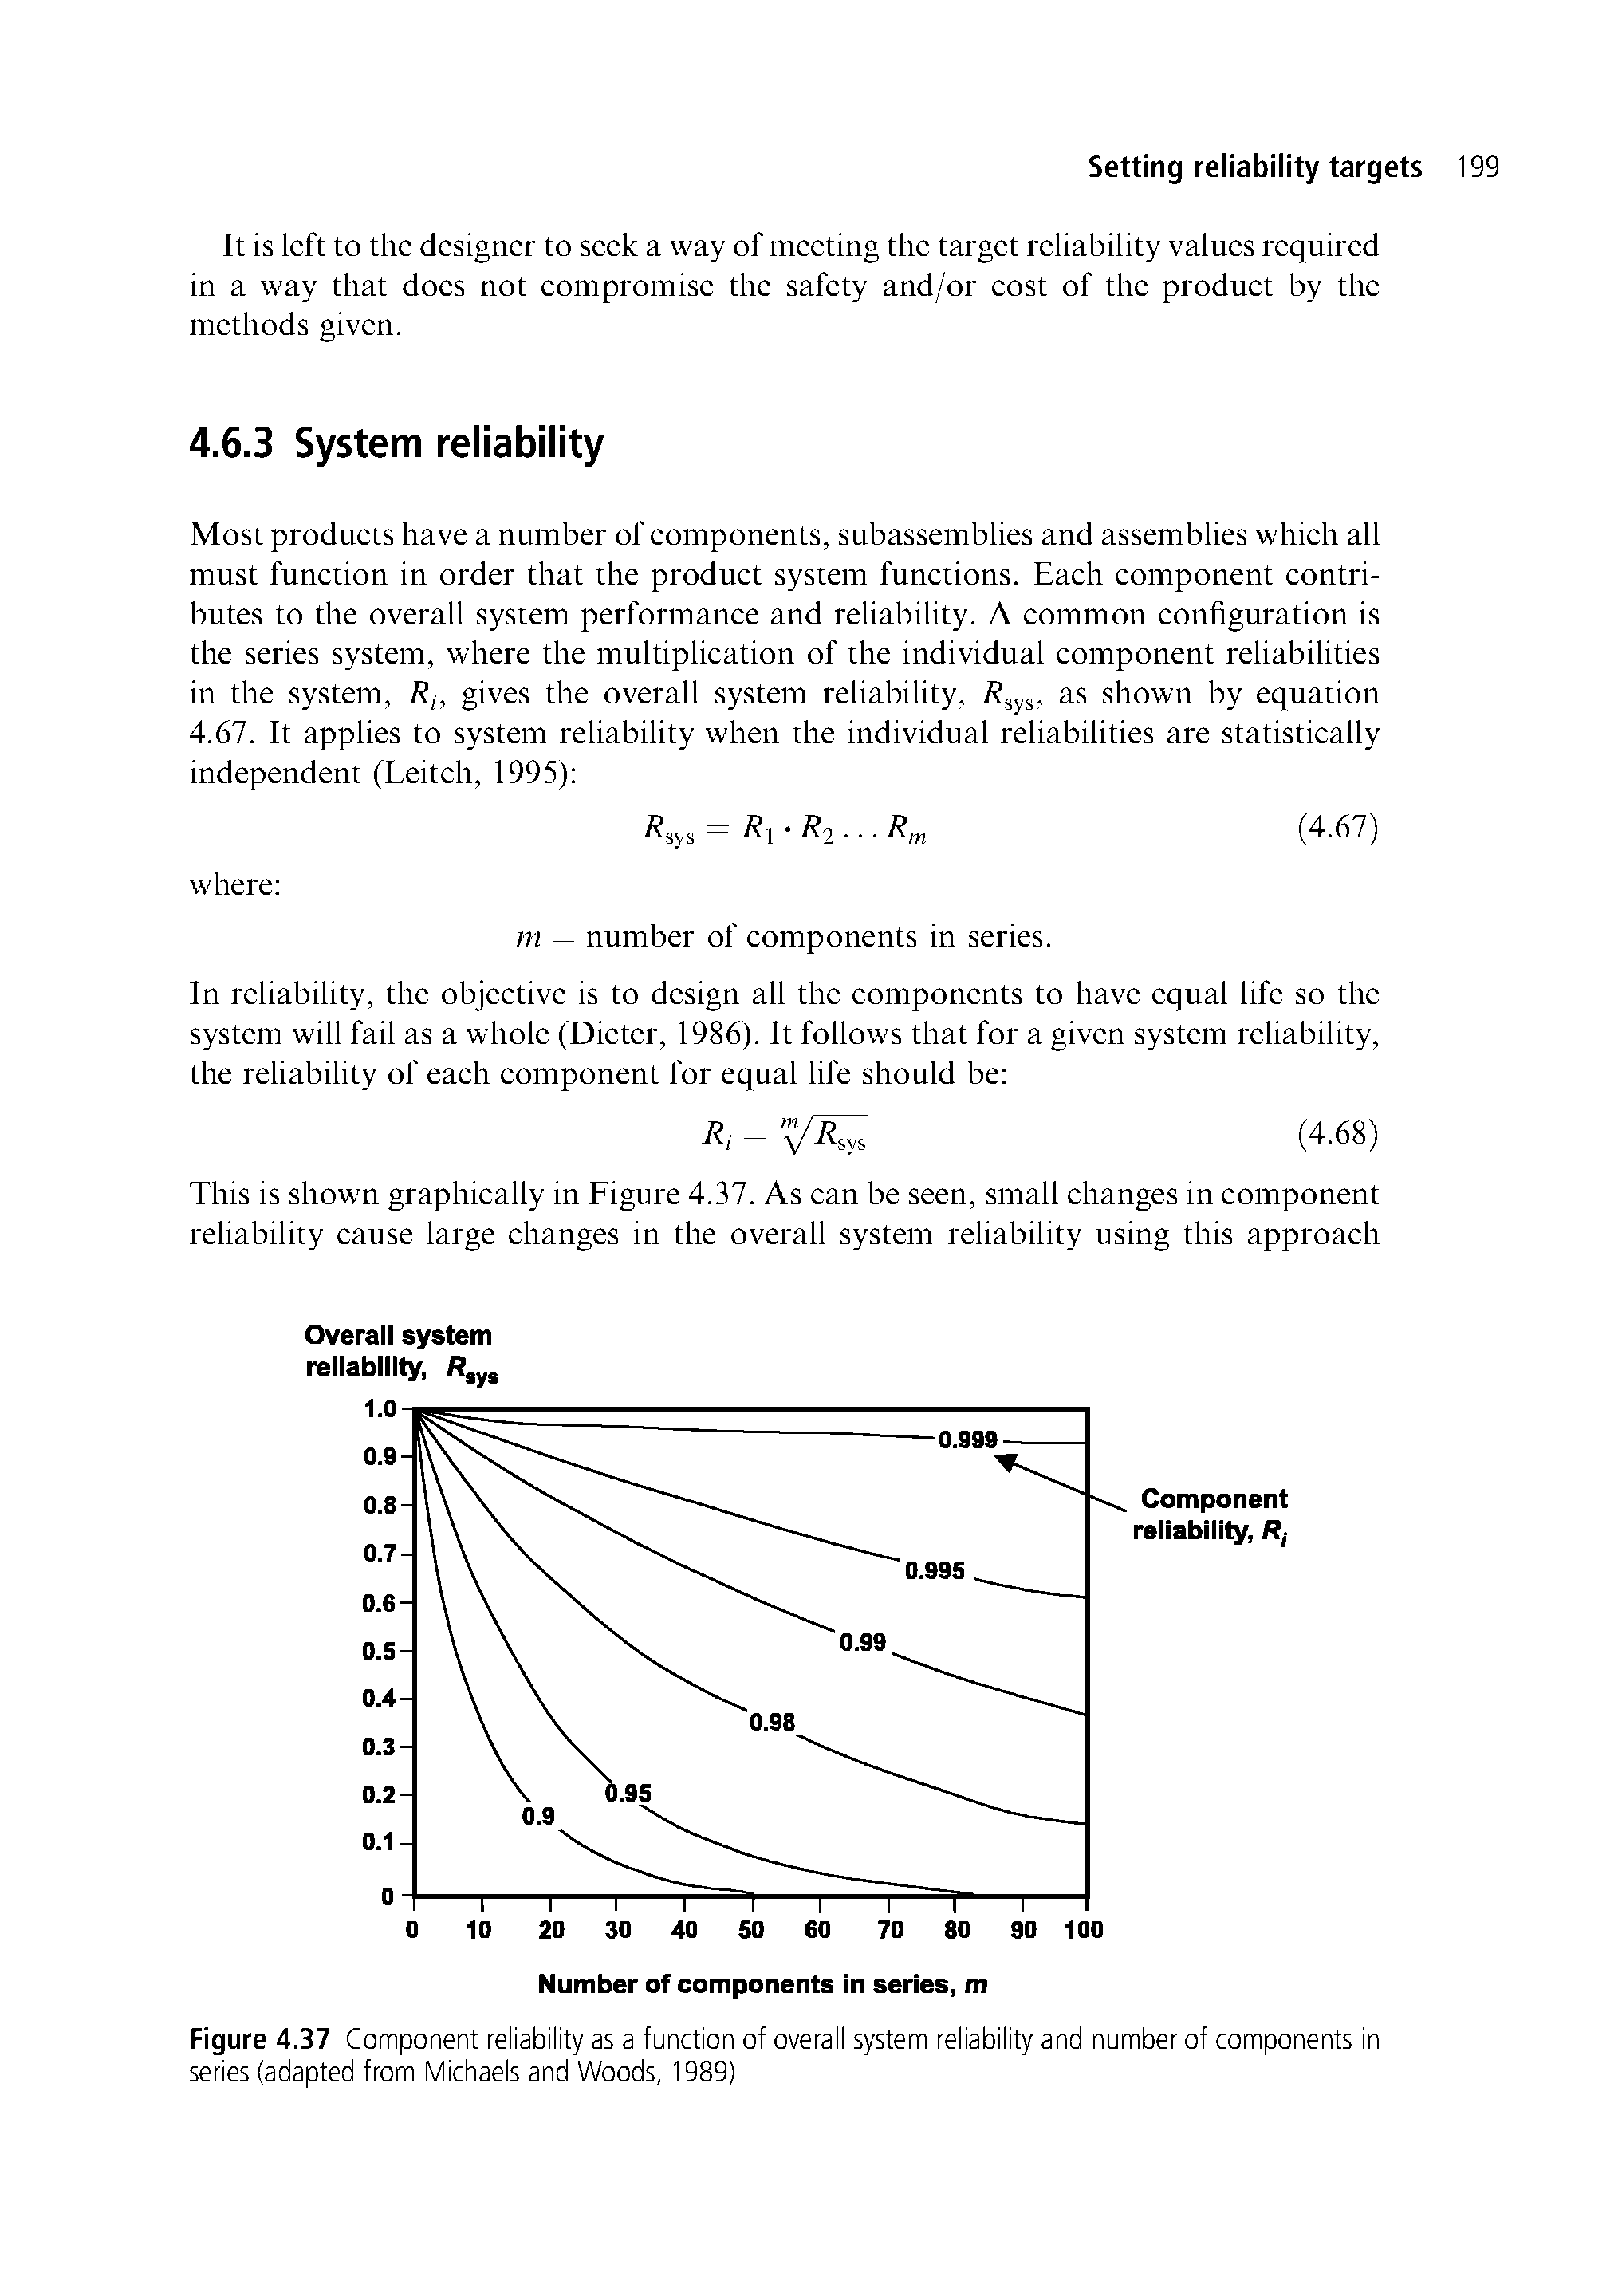 Figure 4.37 Component reliability as a function of overall system reliability and number of components in series (adapted from Michaels and Woods, 1989)...